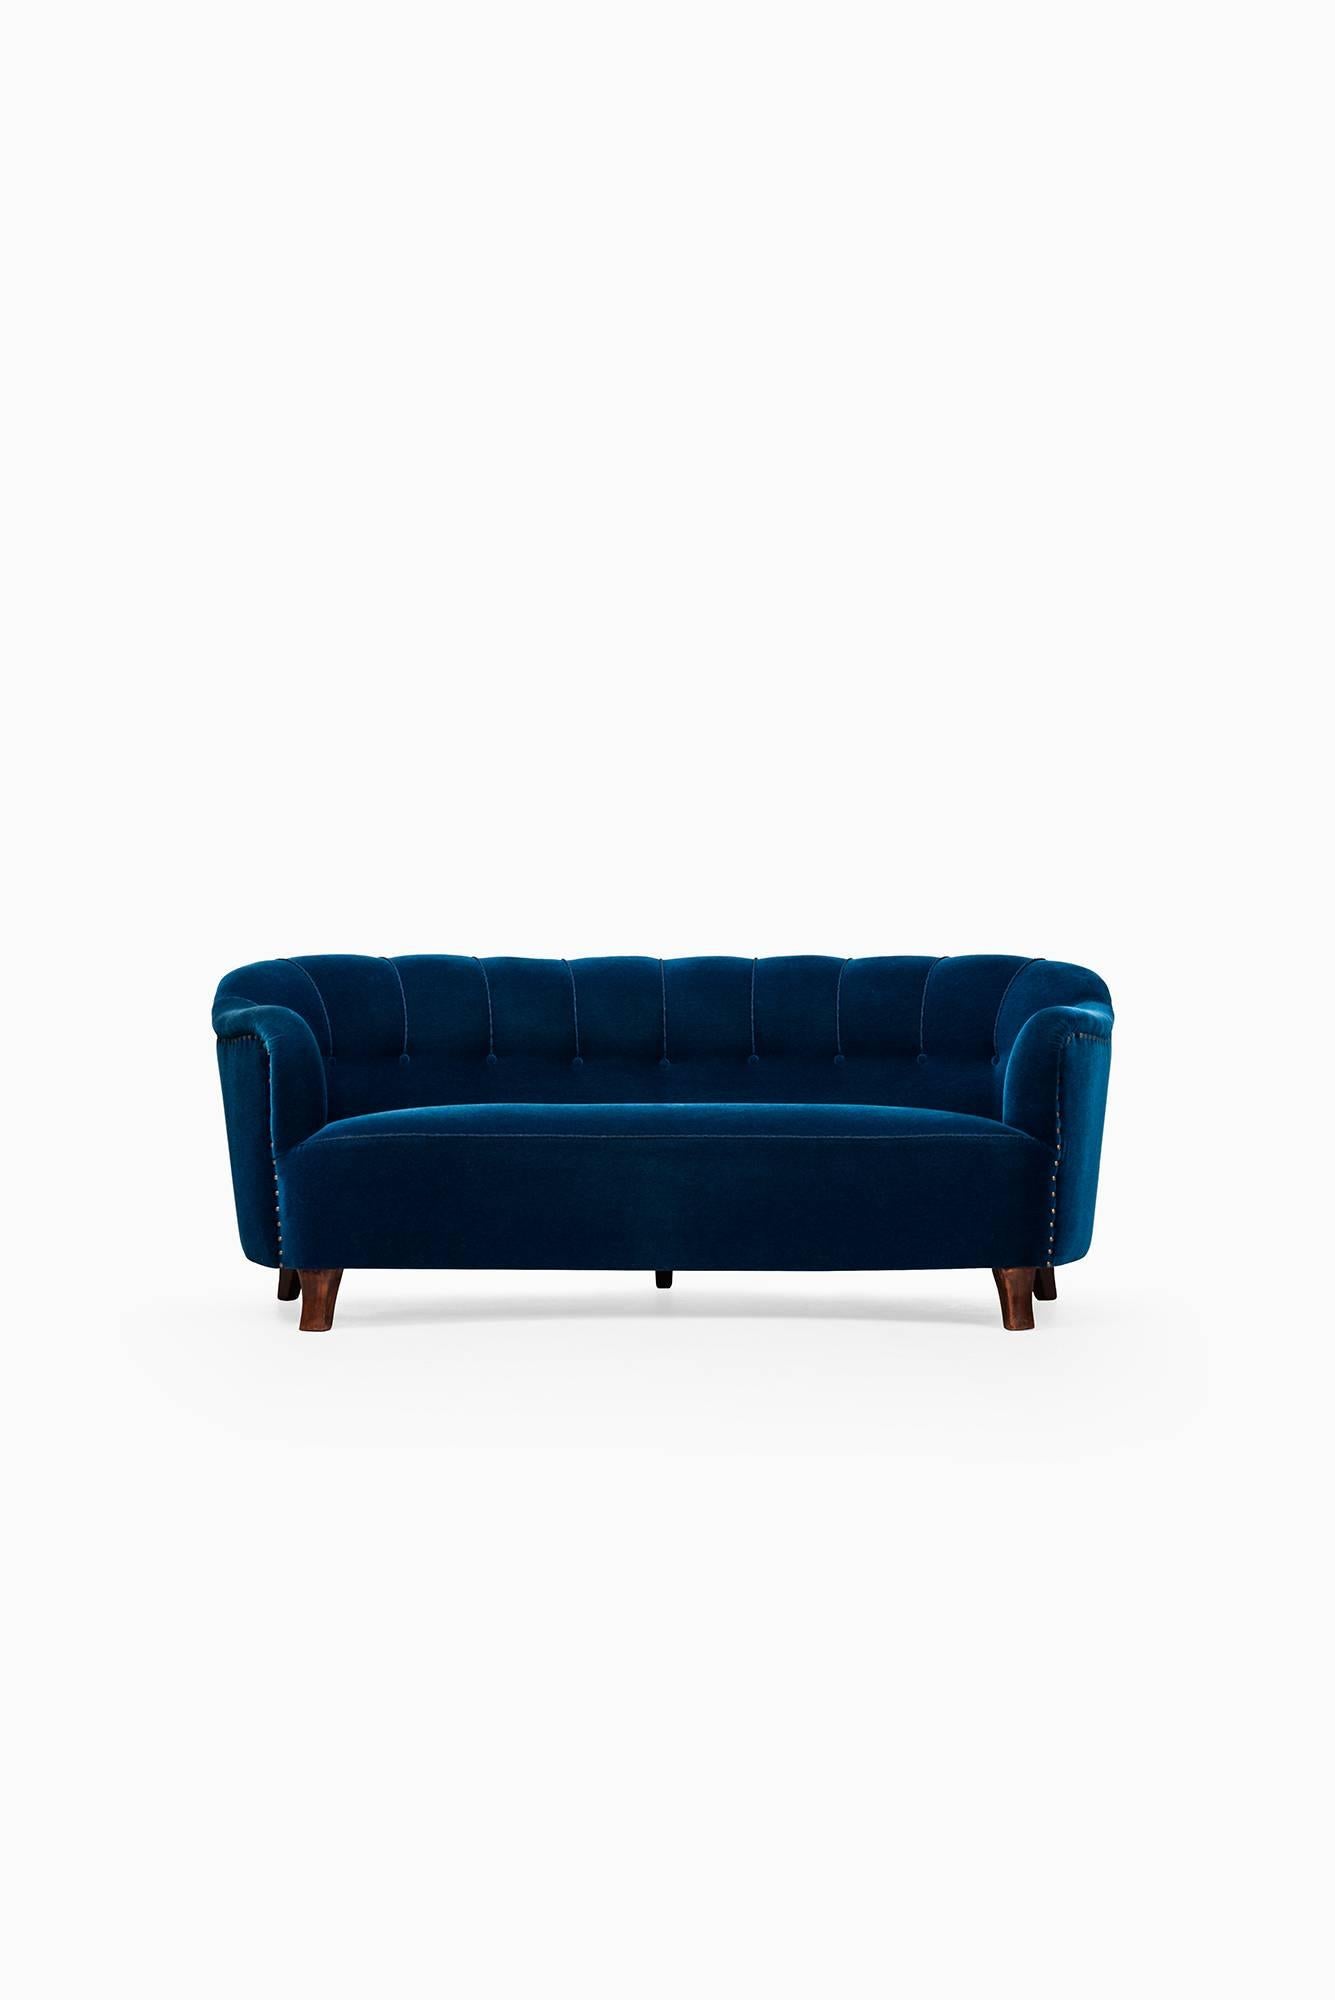 Rare curved sofa attributed to Otto Schulz. Probably produced by Boet in Sweden.